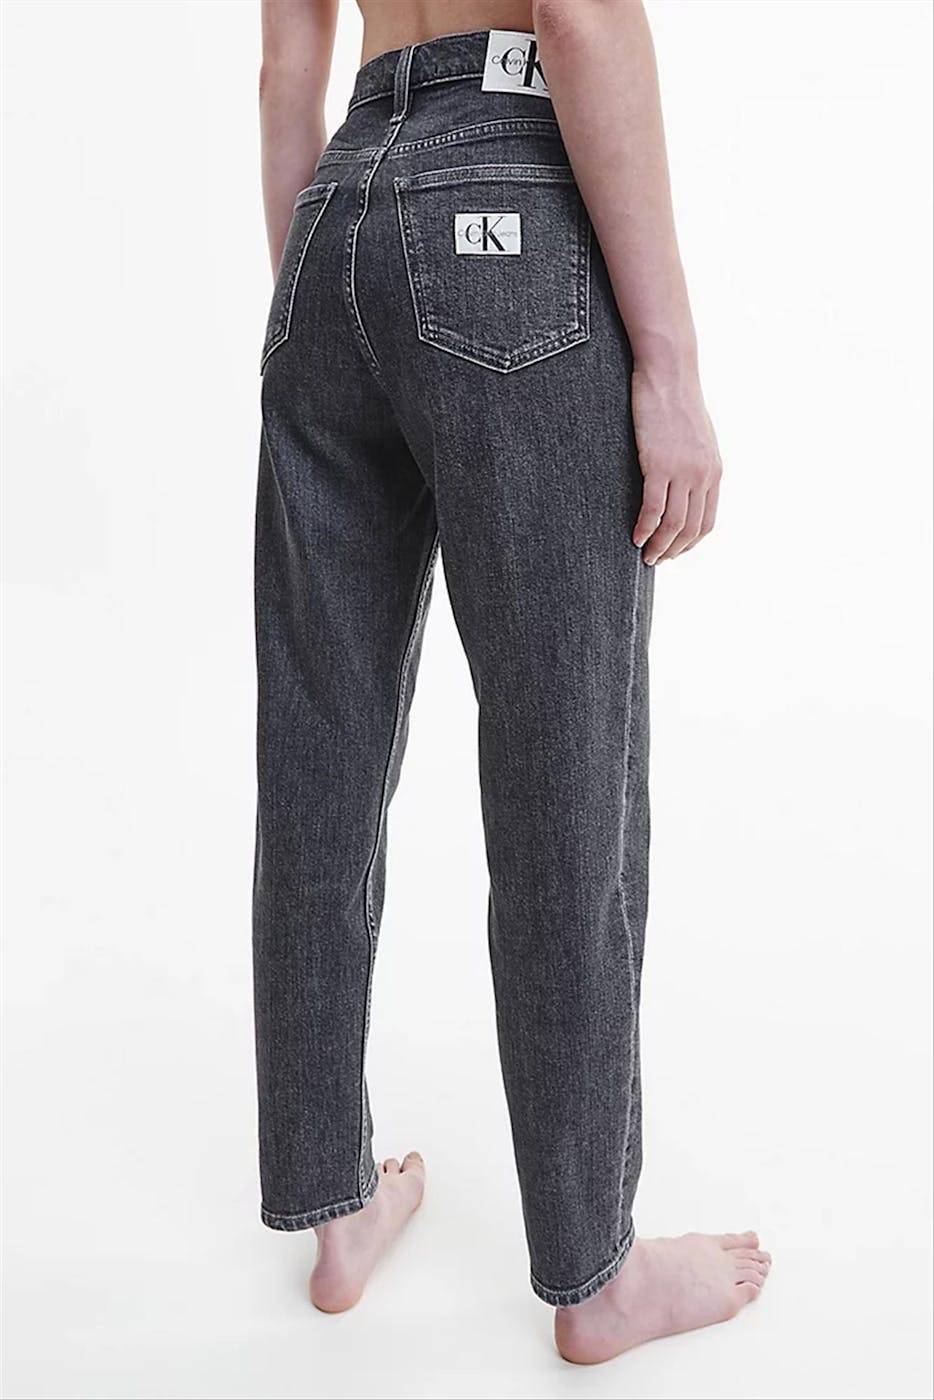 Calvin Klein Jeans - Donkergrijze Tapered Mom jeans